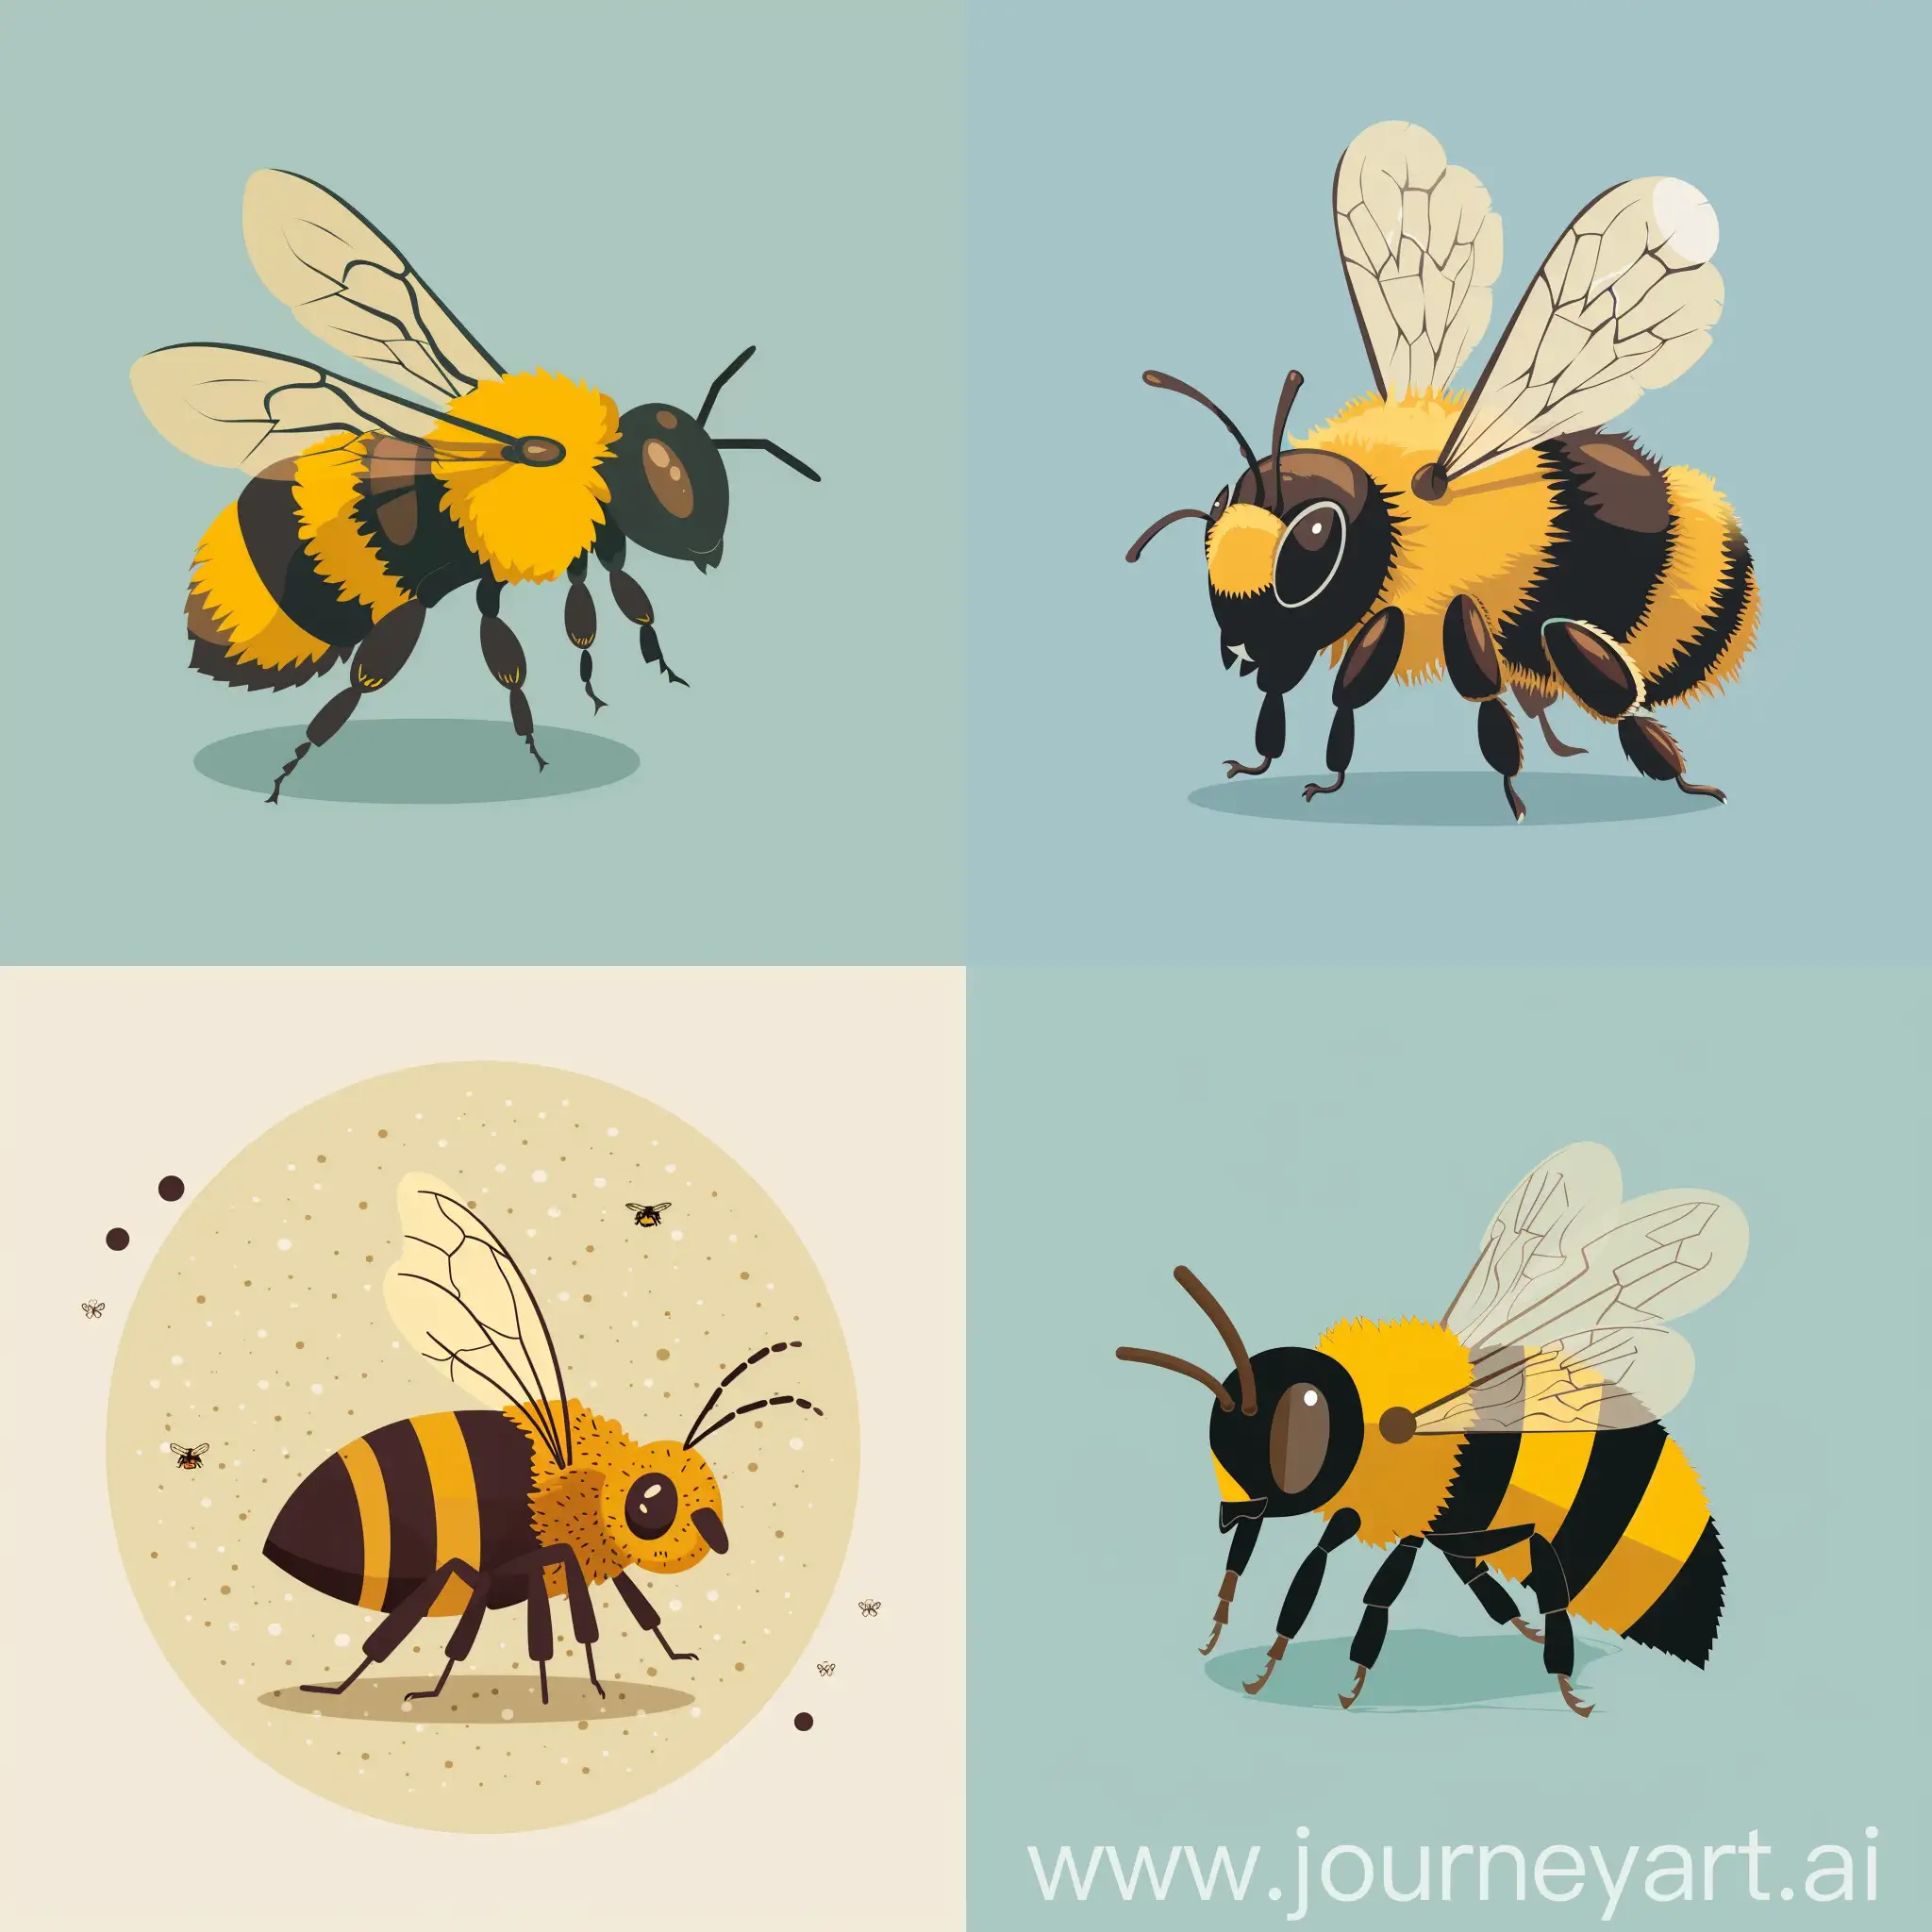 Adorable-Retro-Bee-Illustration-in-HighQuality-Flat-Style